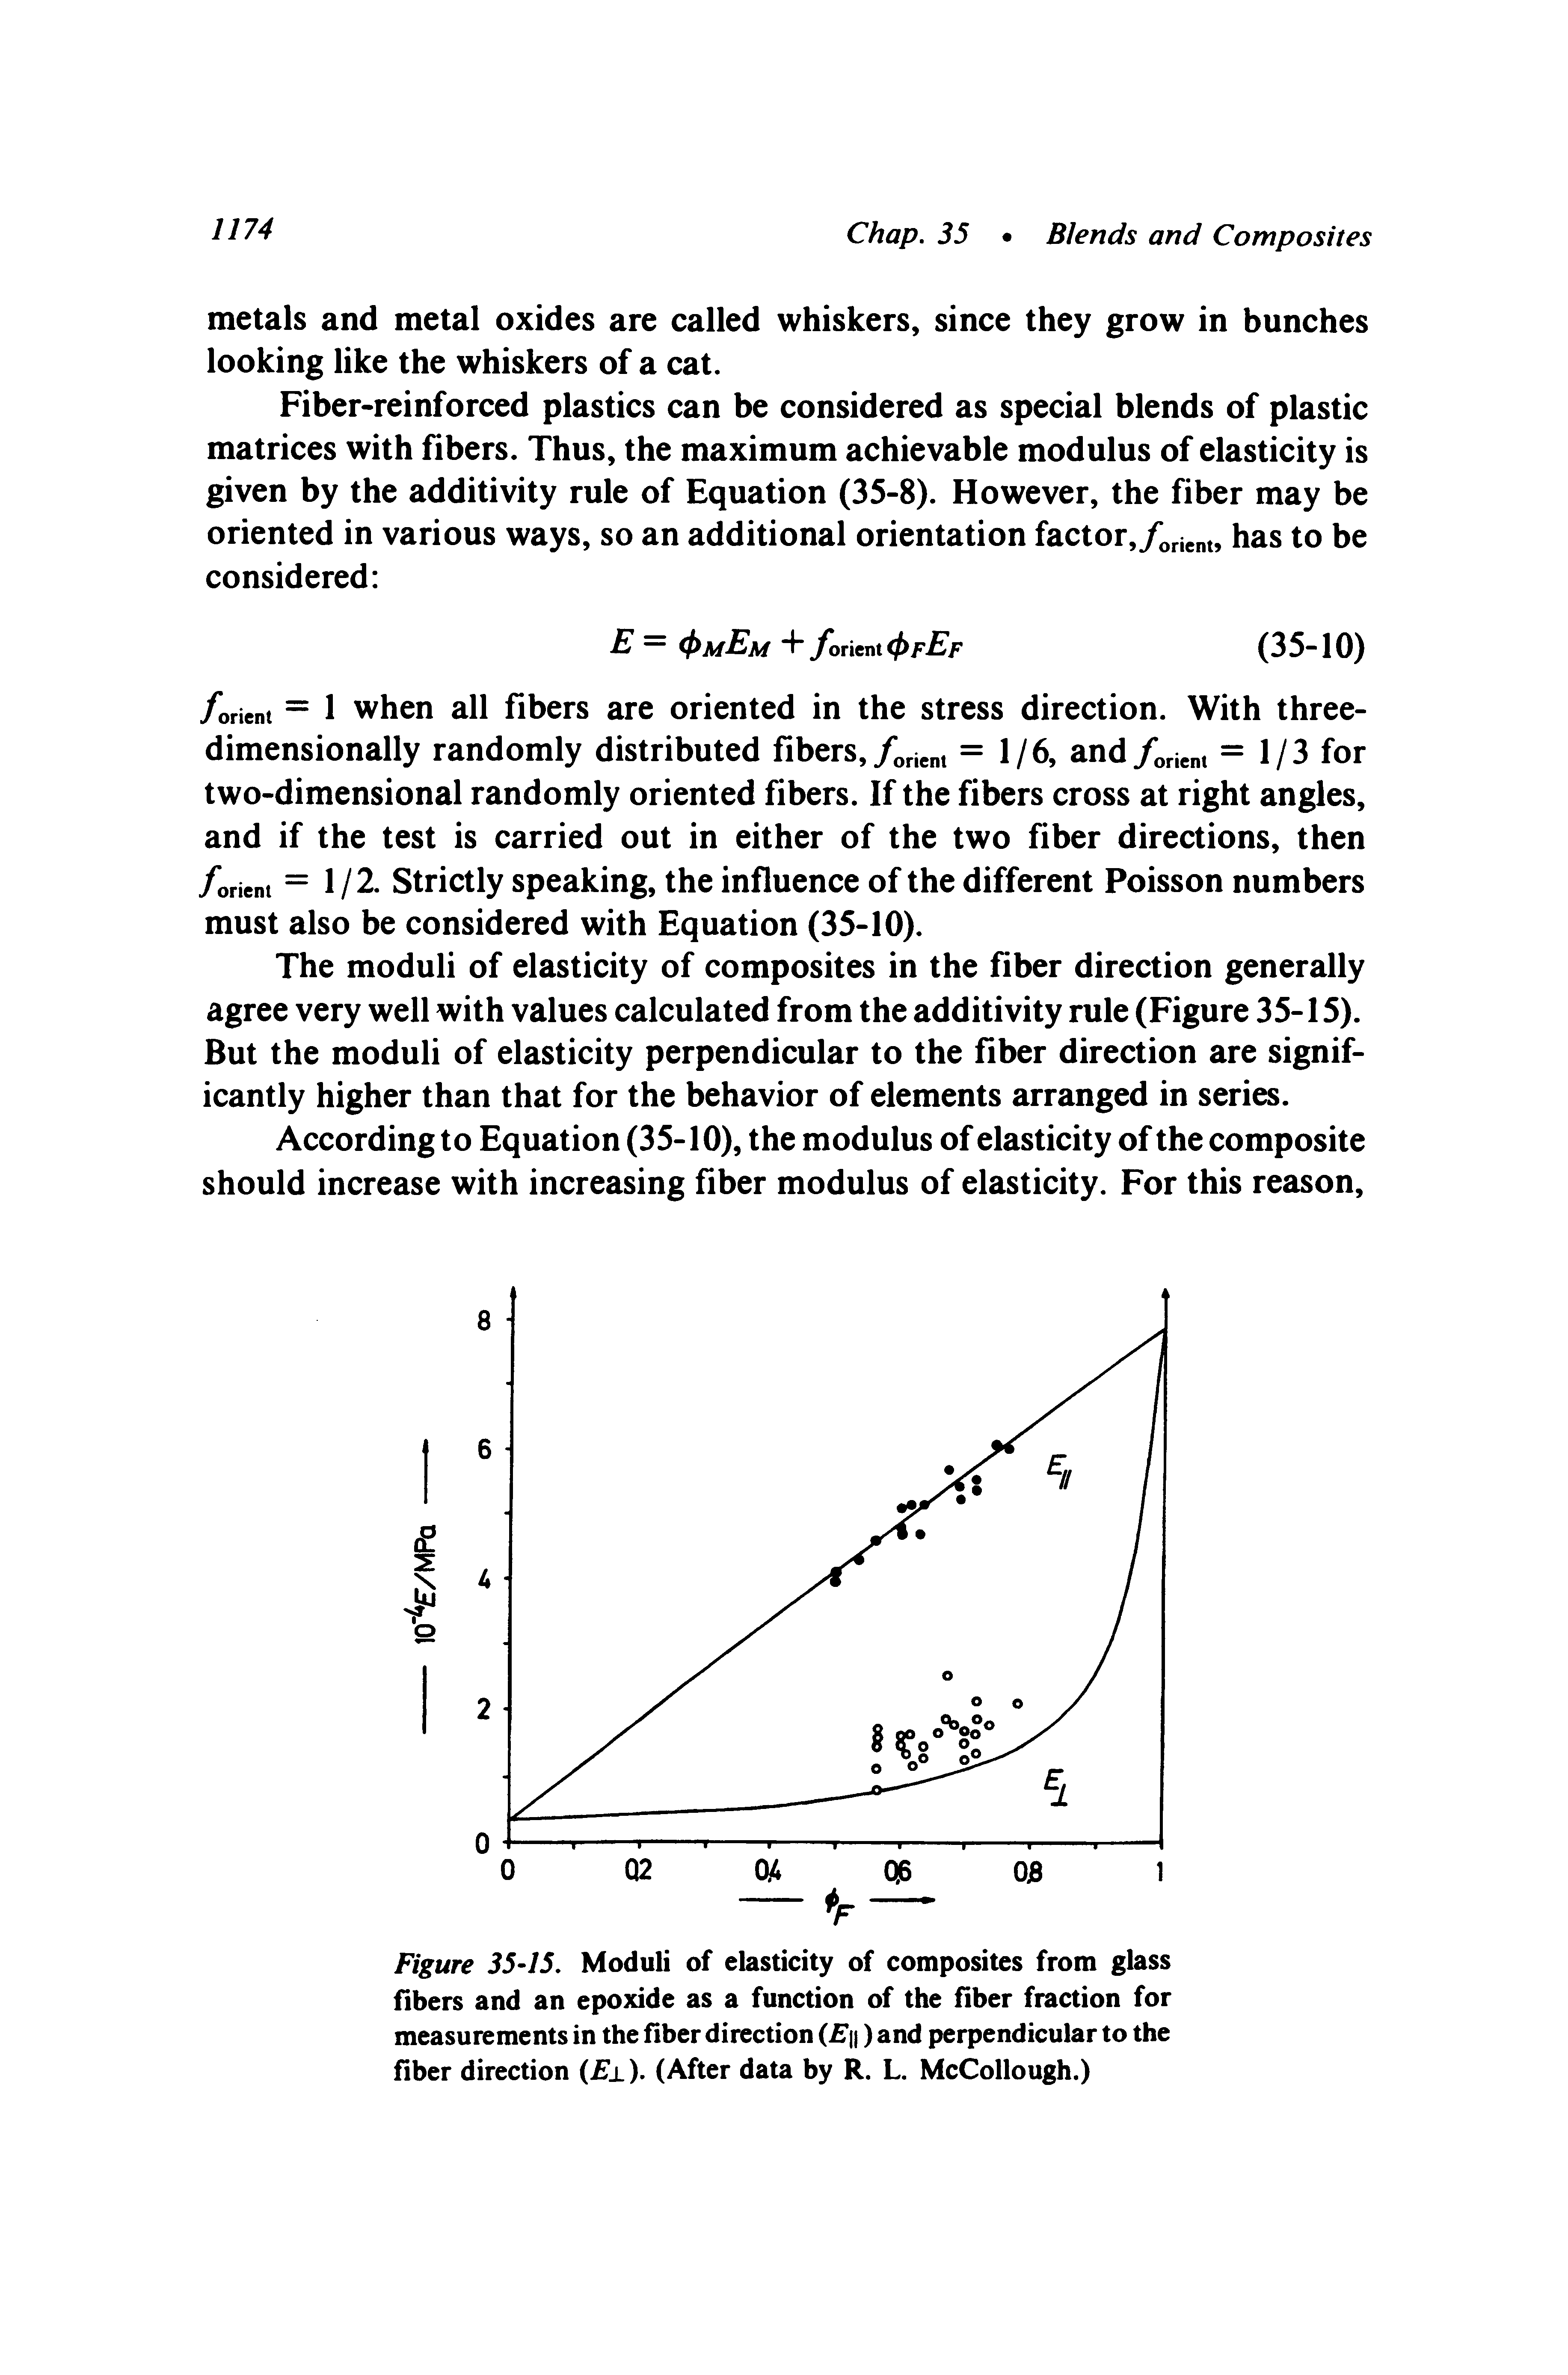 Figure 35-15. Moduli of elasticity of composites from glass fibers and an epoxide as a function of the fiber fraction for measurements in the fiber direction ( h ) and perpendicular to the fiber direction ( 1). (After data by R. L. McCollough.)...